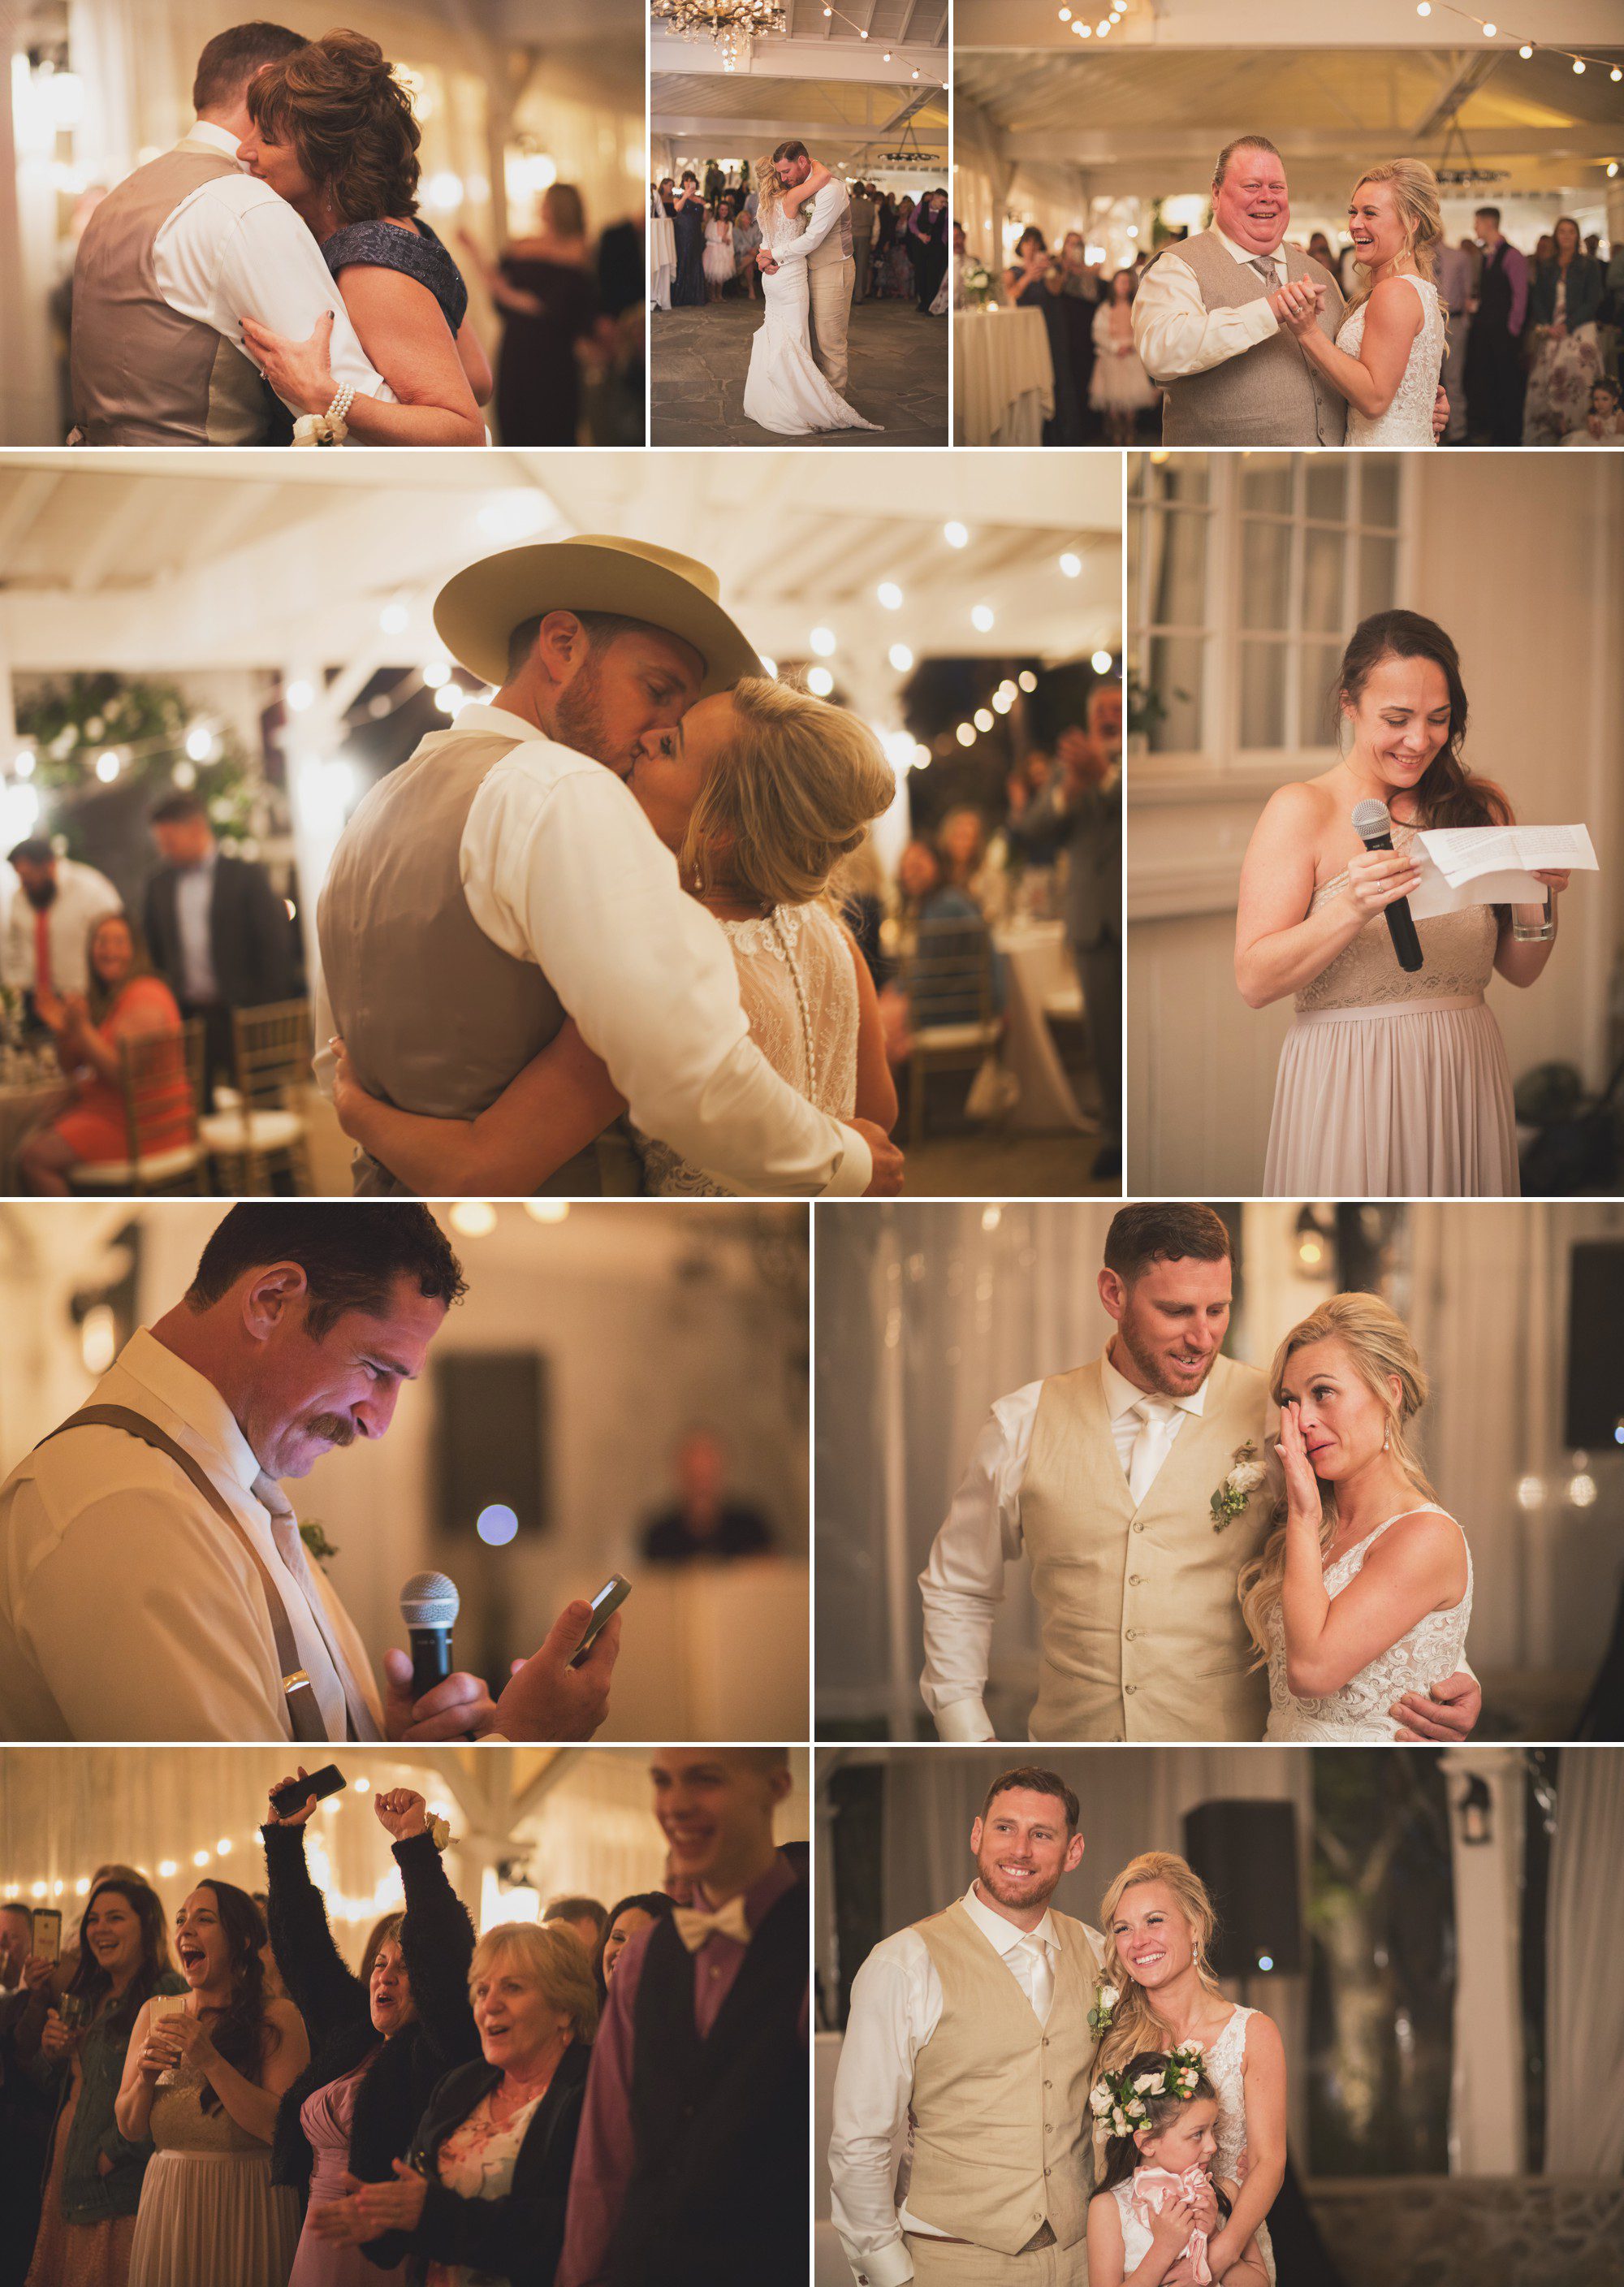 First dances and toasts at reception after before the wedding ceremony at Cedarwood weddings in Nashville, TN. April spring wedding, photos by Krista Lee Photography.